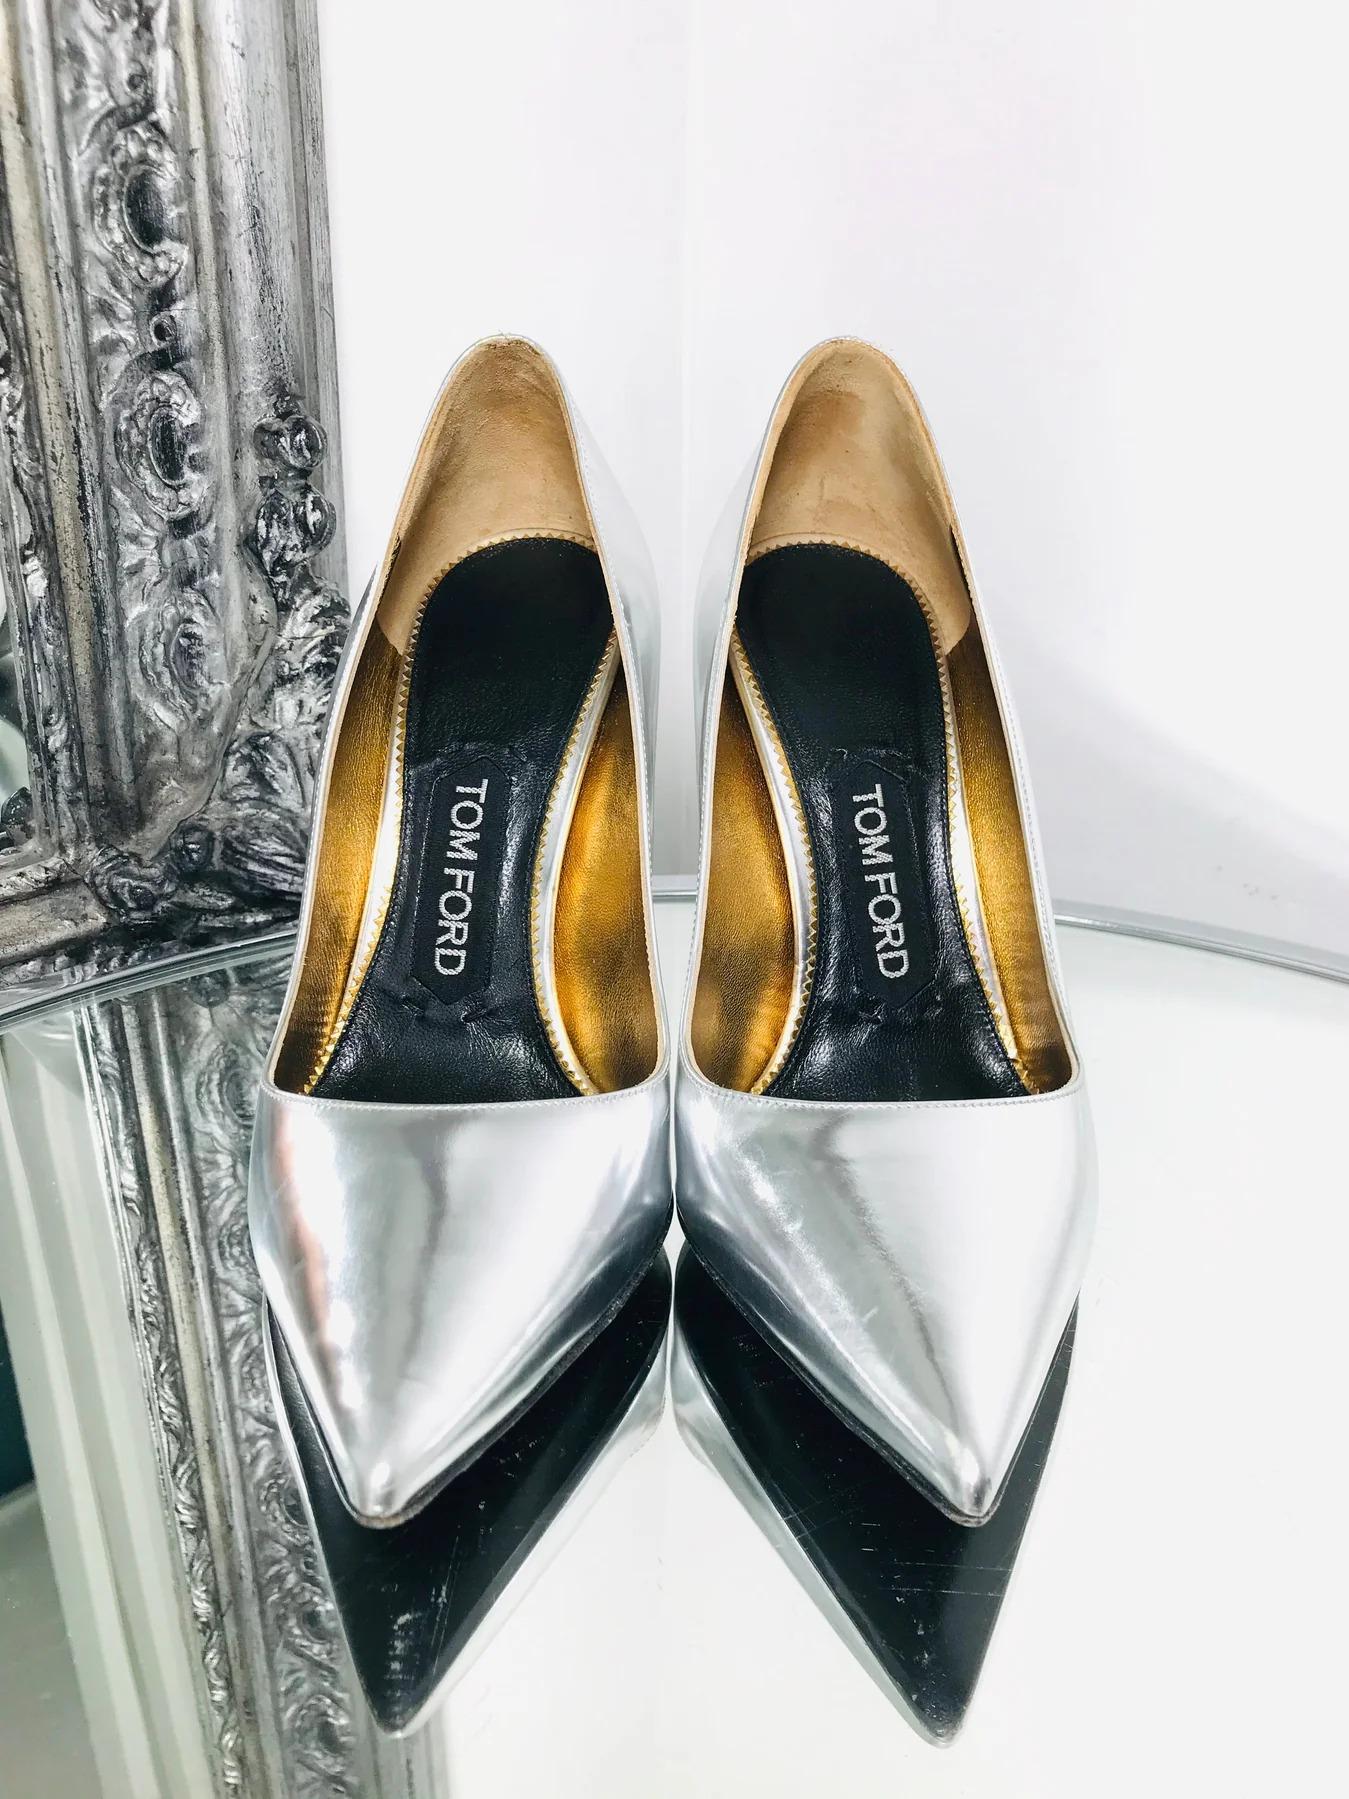 Tom Ford Metallic Leather Pumps

Silver tone metal stiletto heel with round detail. Pointed toe. Leather insole.

Additional information:
Size – 35.5
Condition – Very Good ( some minor signs of wear)
Comes with- Box, Dustbags and Spare Heel Tips